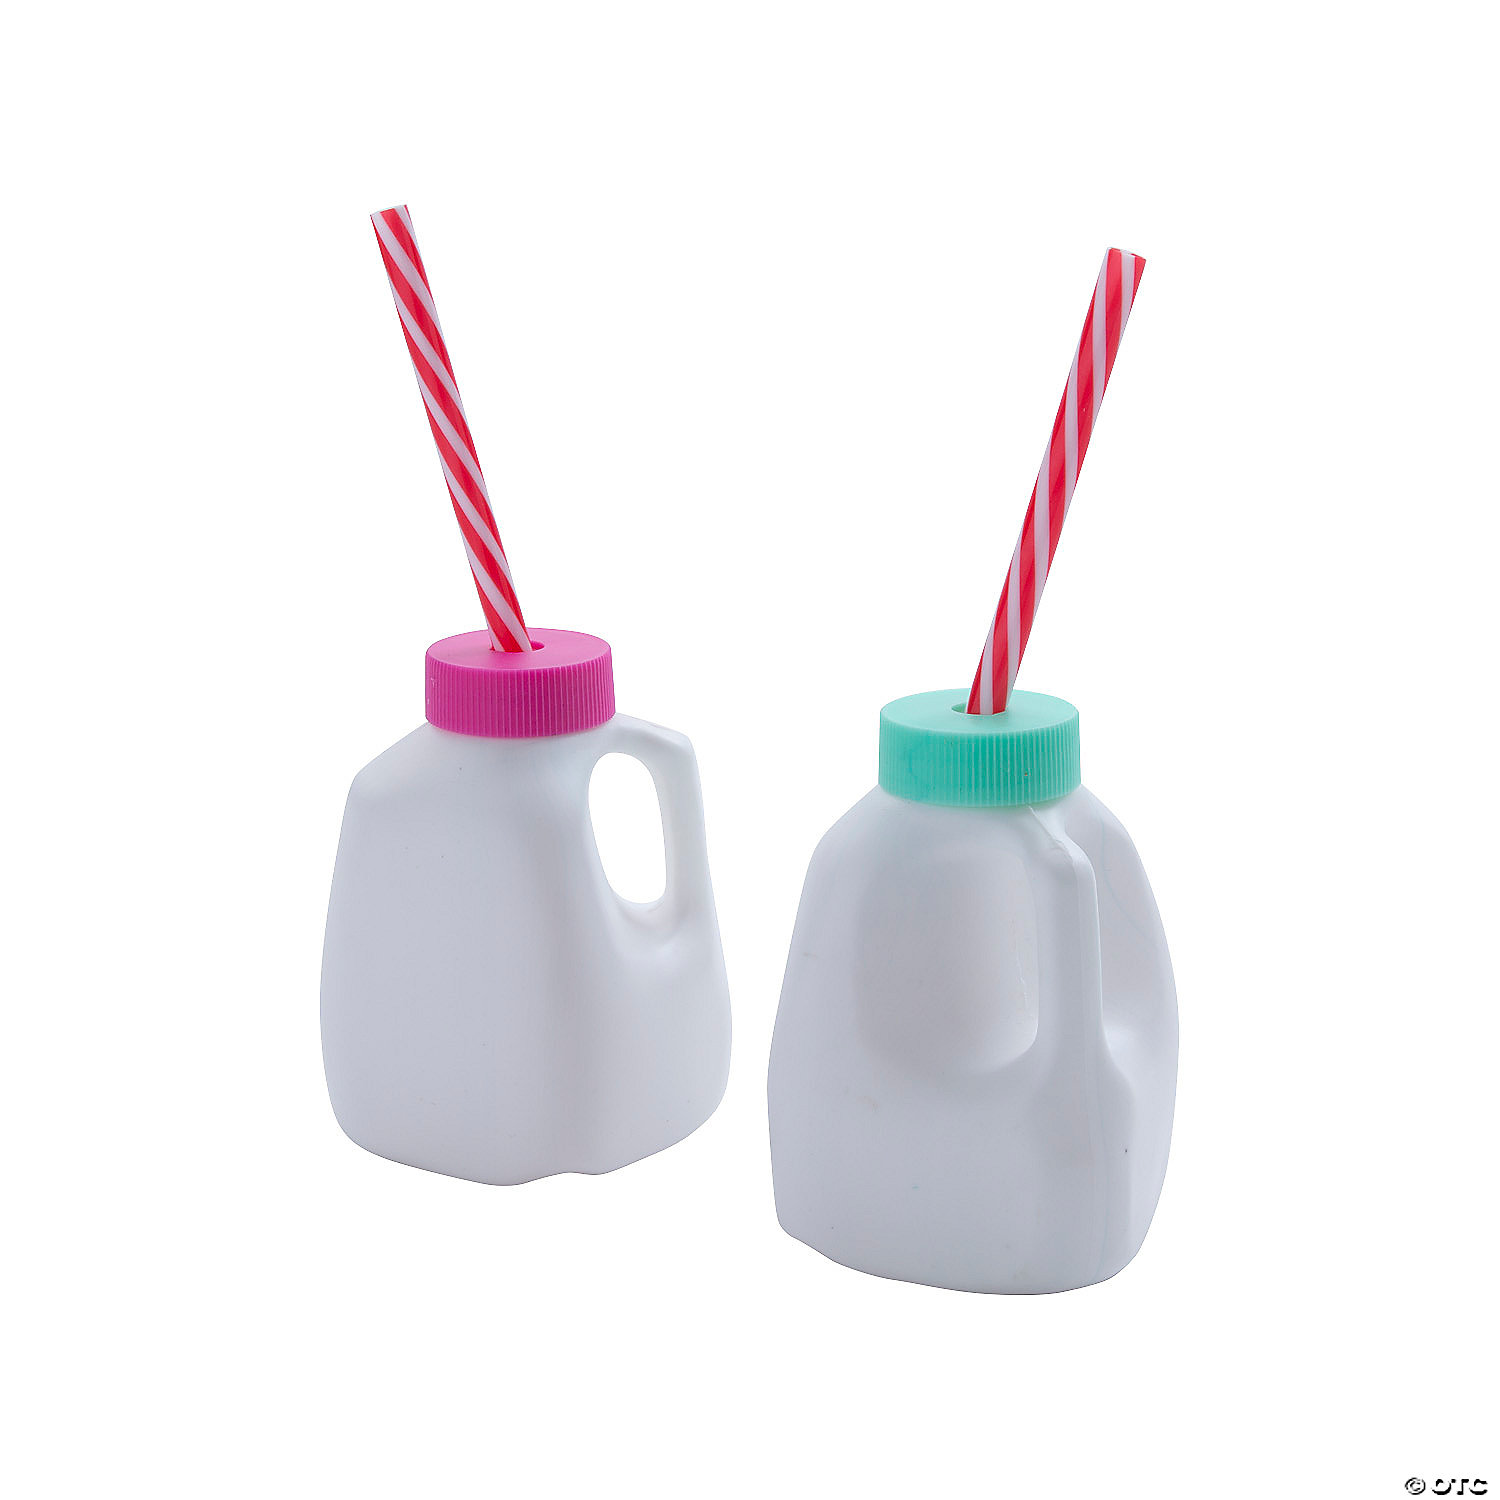 https://s7.orientaltrading.com/is/image/OrientalTrading/VIEWER_ZOOM/mini-milk-carton-shaped-bpa-free-plastic-cups-with-lids-and-straws~13957201